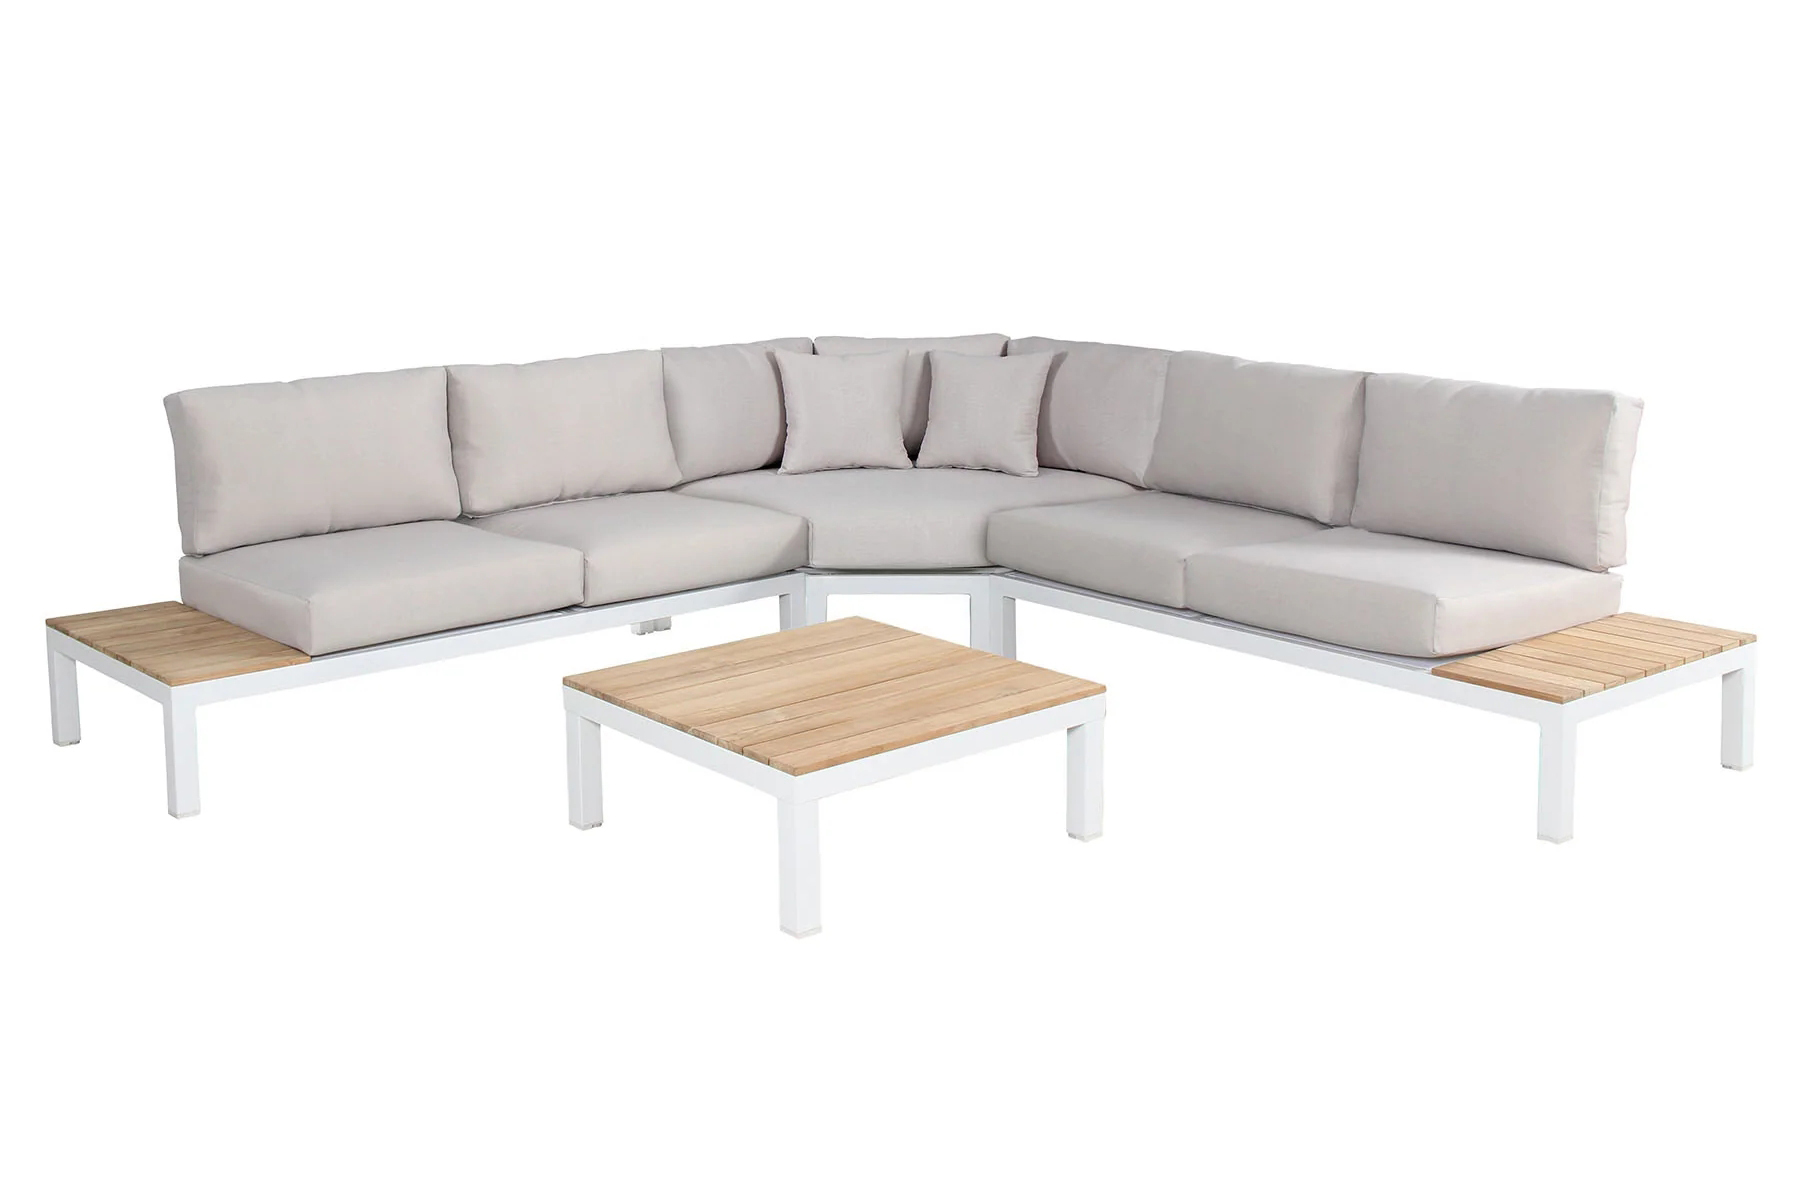 6-Piece Aluminum Patio Furniture Set, Outdoor L-Shaped Sectional Sofa with Plastic Wood Side Table and Soft Cushion